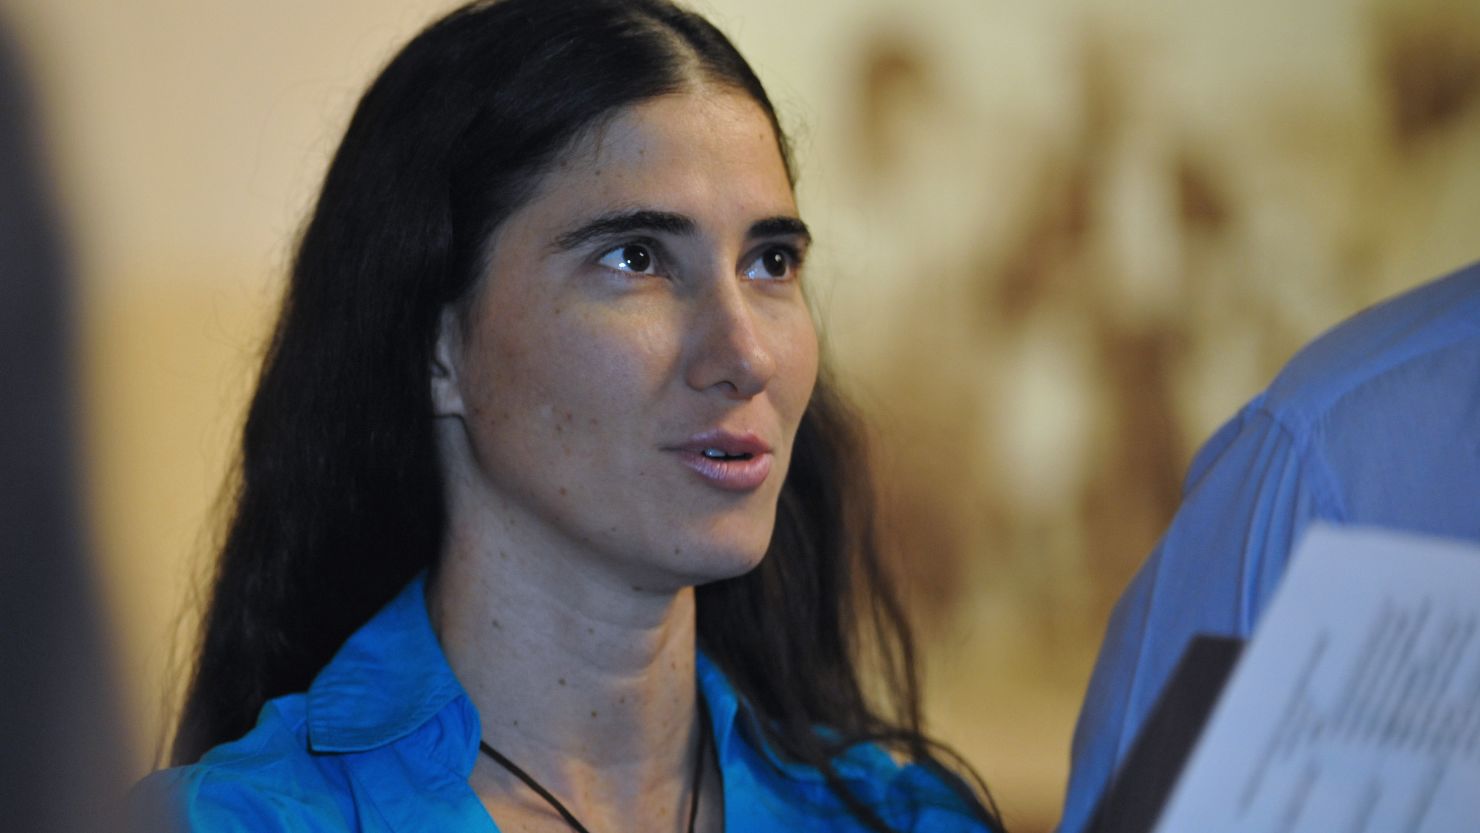 Dissident blogger Yoani Sanchez, pictured here in 2011, was reportedly arrested as she traveled to cover a trial in eastern Cuba.